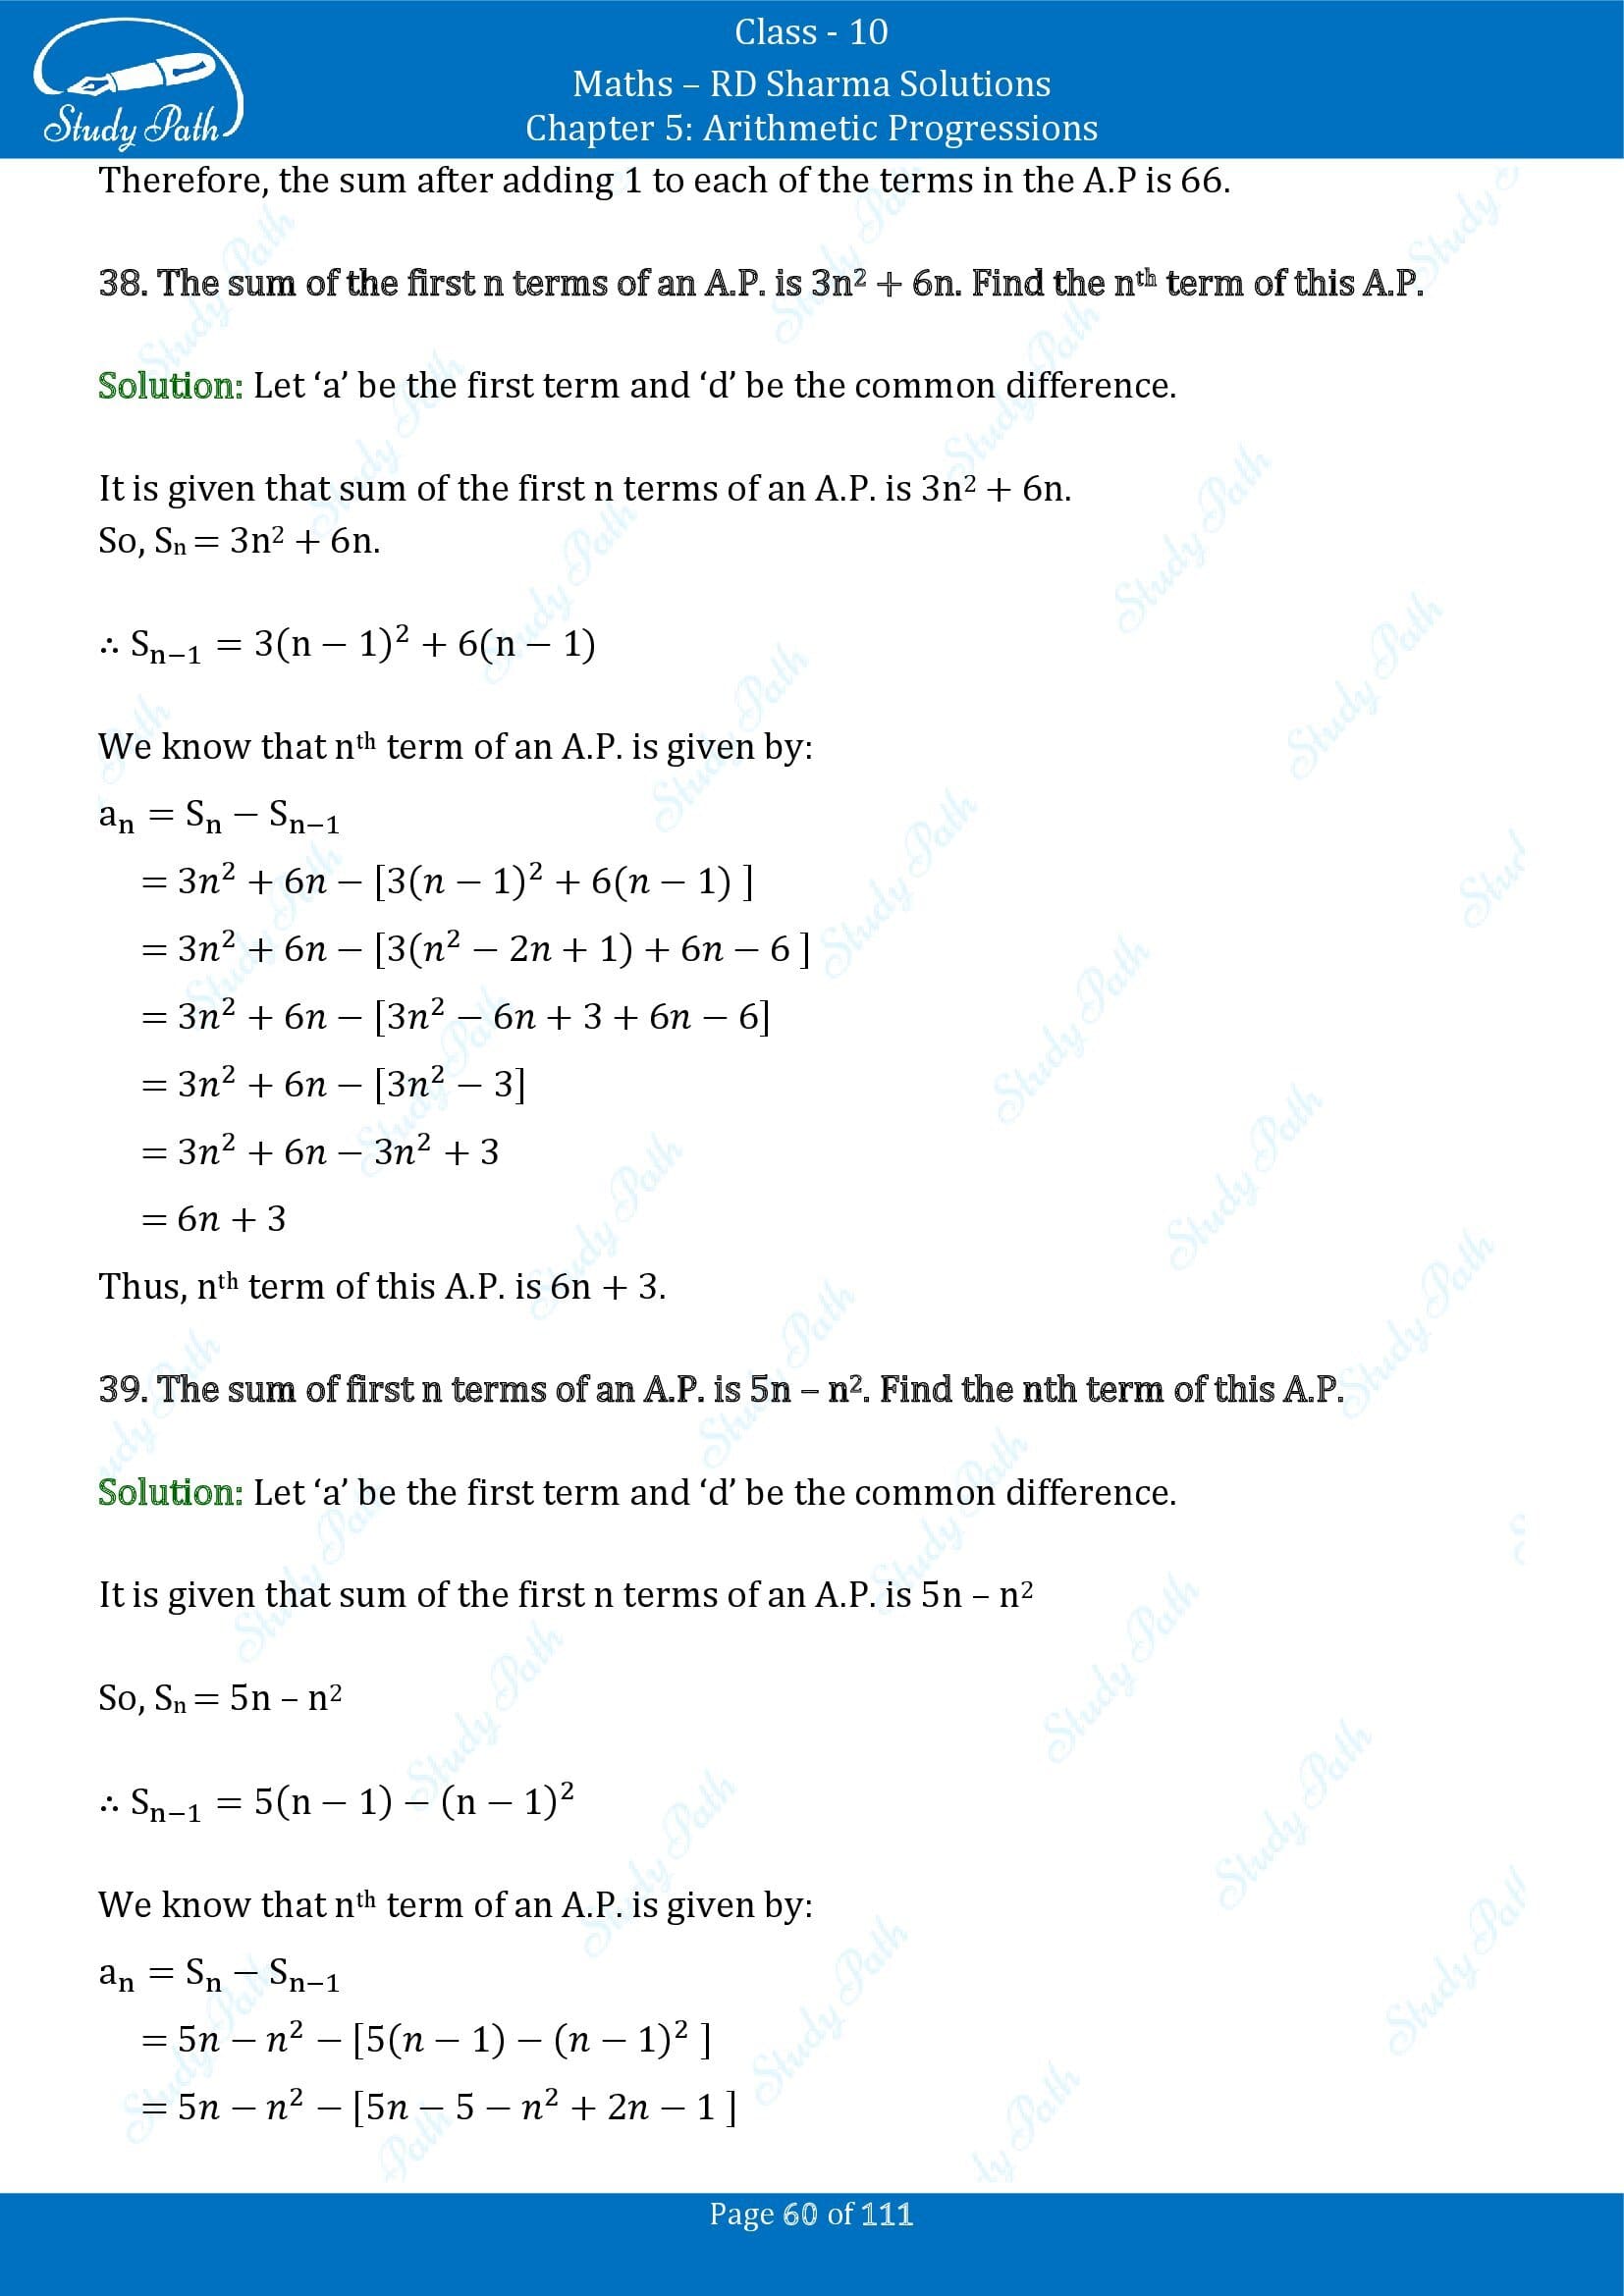 RD Sharma Solutions Class 10 Chapter 5 Arithmetic Progressions Exercise 5.6 00060